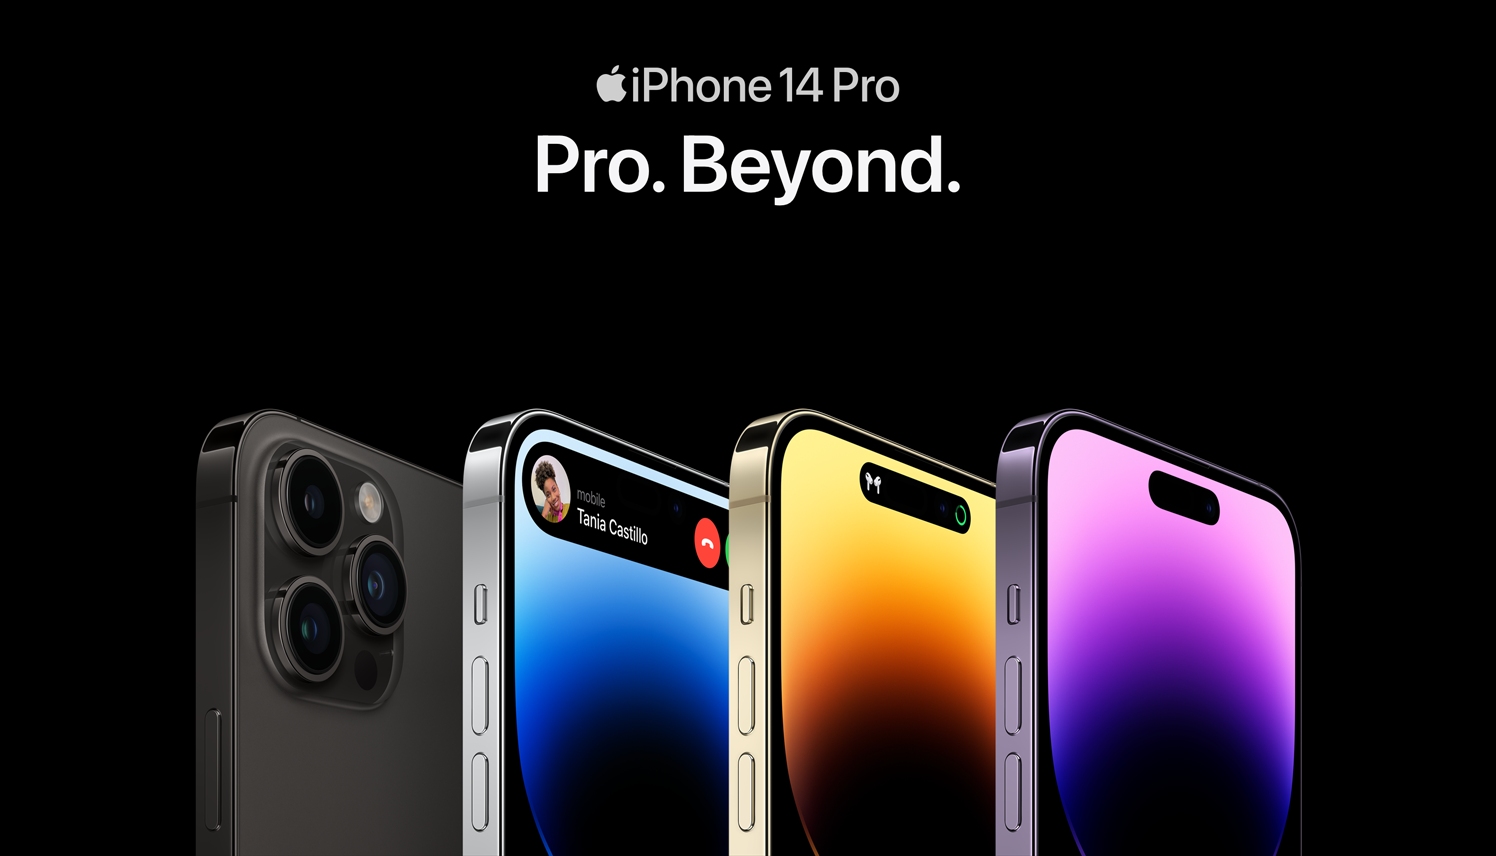 Learn more about iPhone